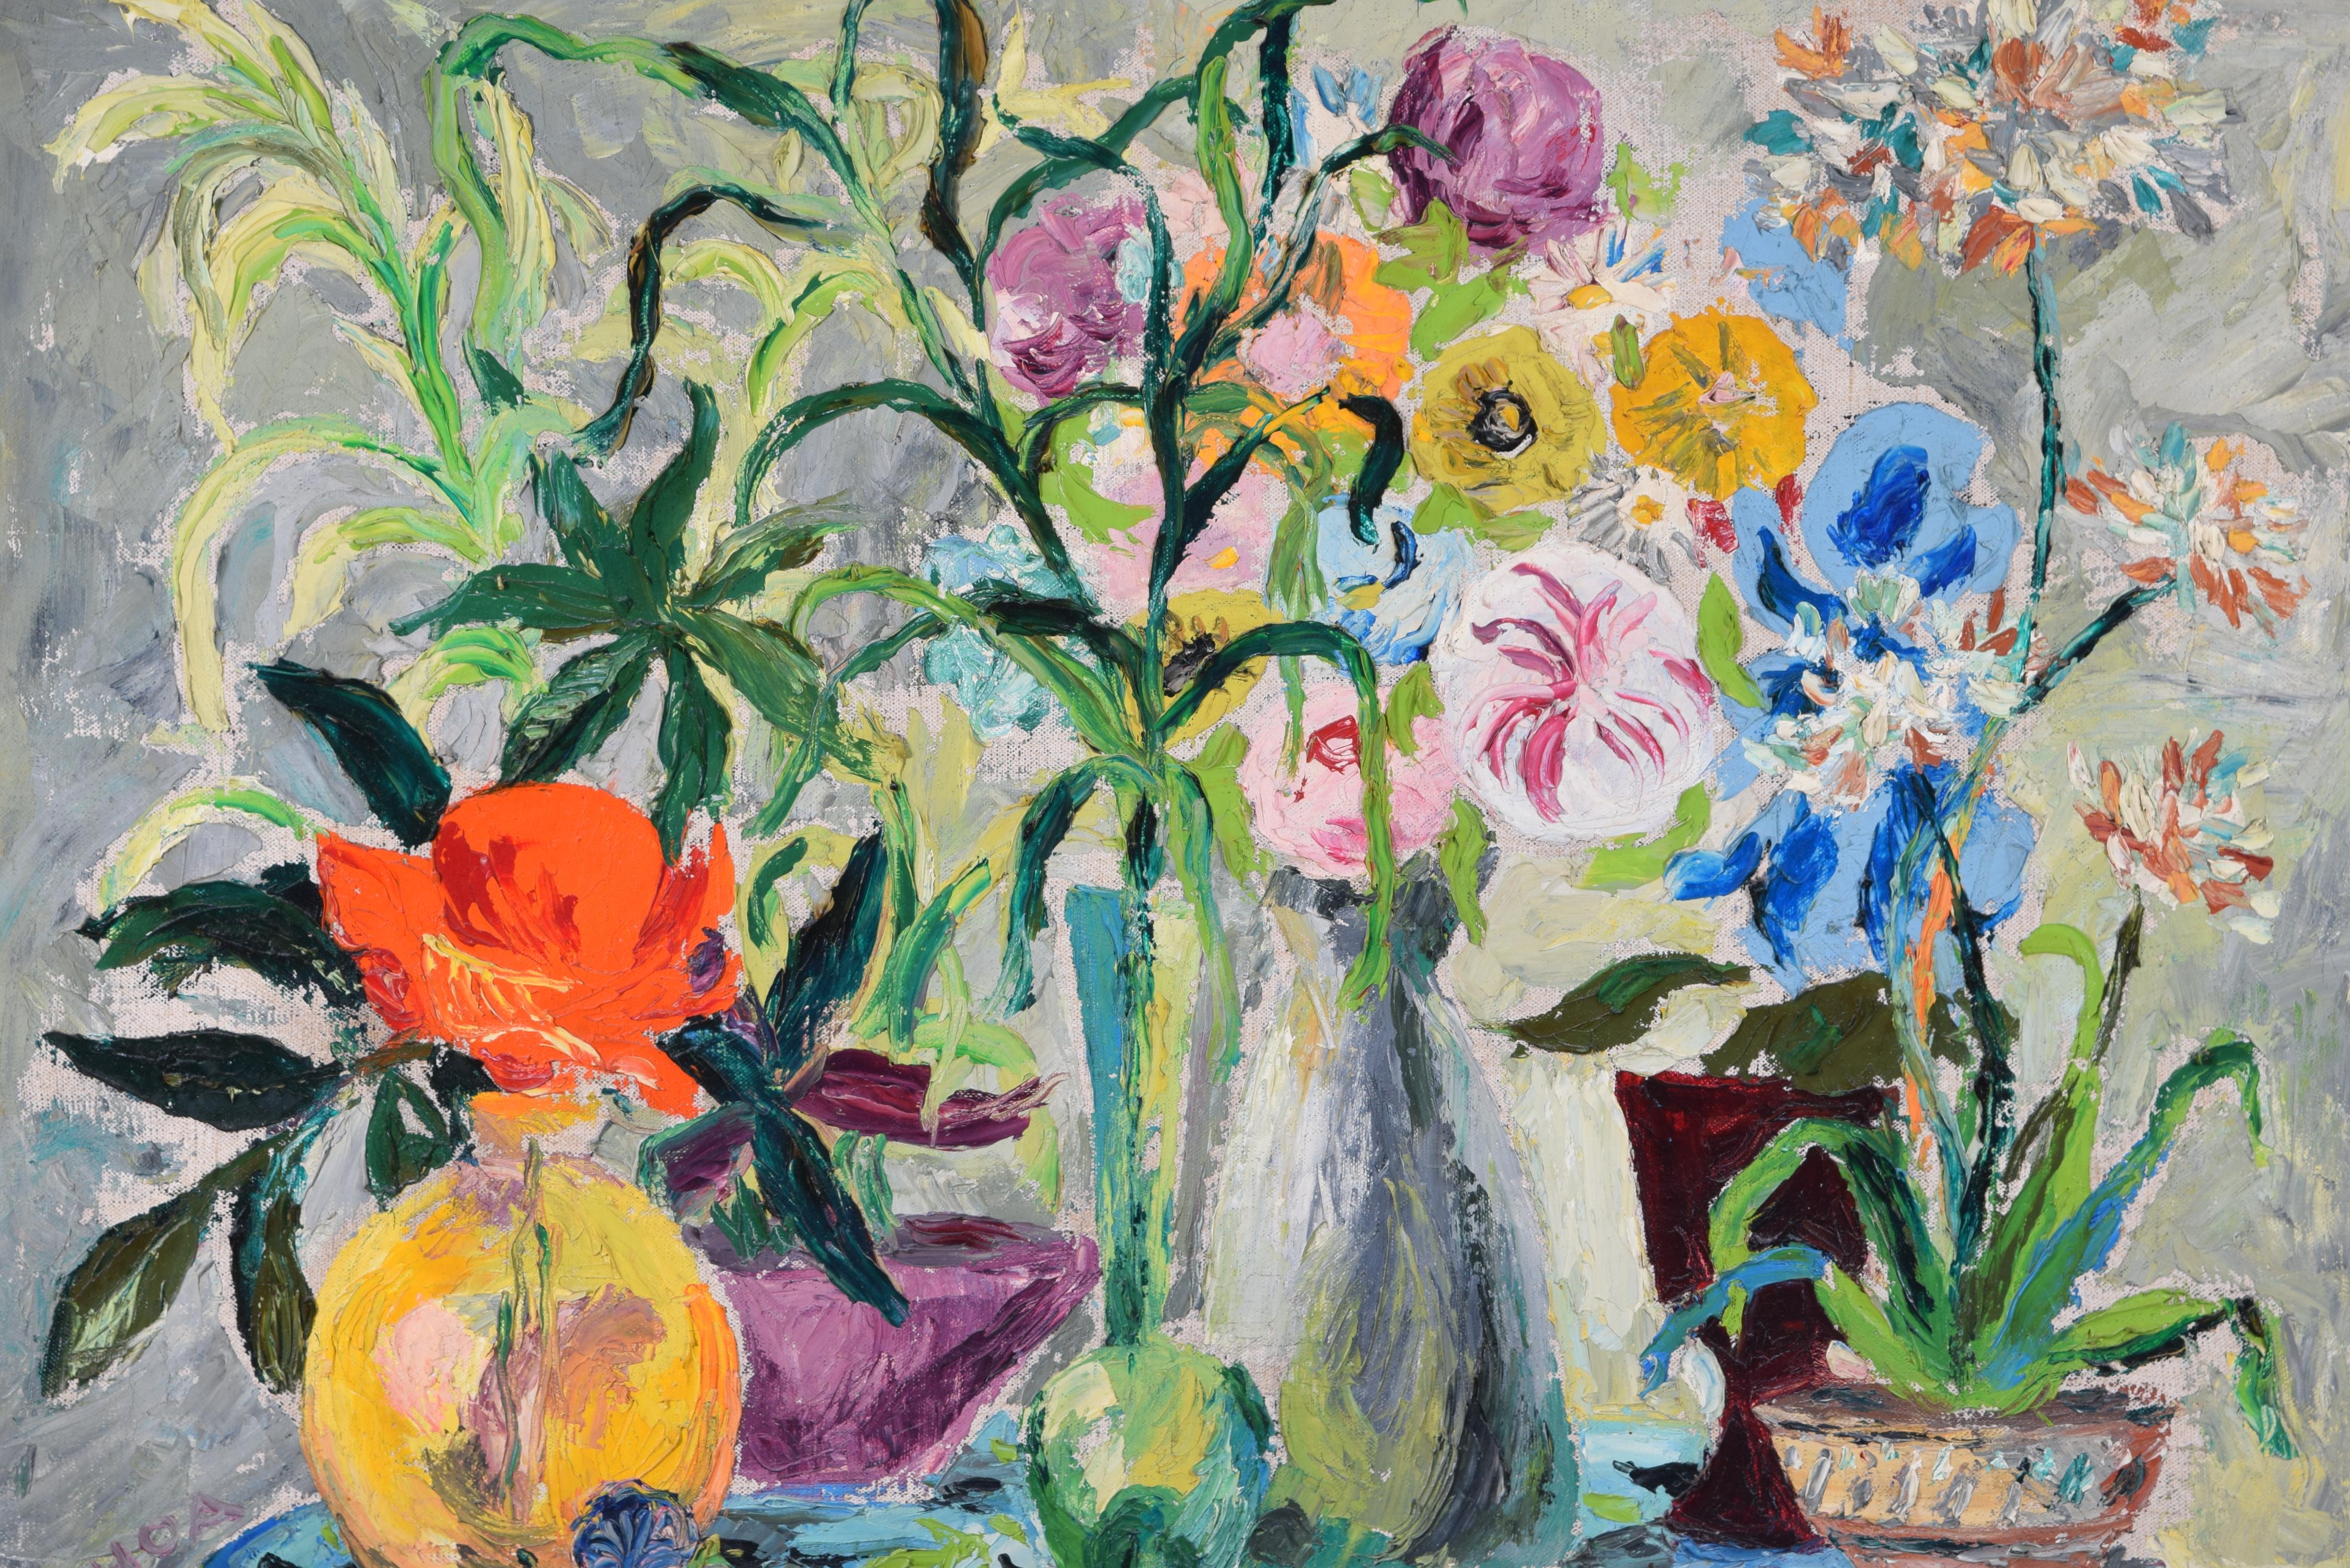 Still life of flowers. Oil on canvas. GARCÍA-OCHOA IBÁÑEZ, Luis (San Sebastián, 1920-Madrid, 2019). 1949. 
Signed and dated towards the lower left corner. Label on the back. 
Still life that shows a round table covered with cloth and a series of